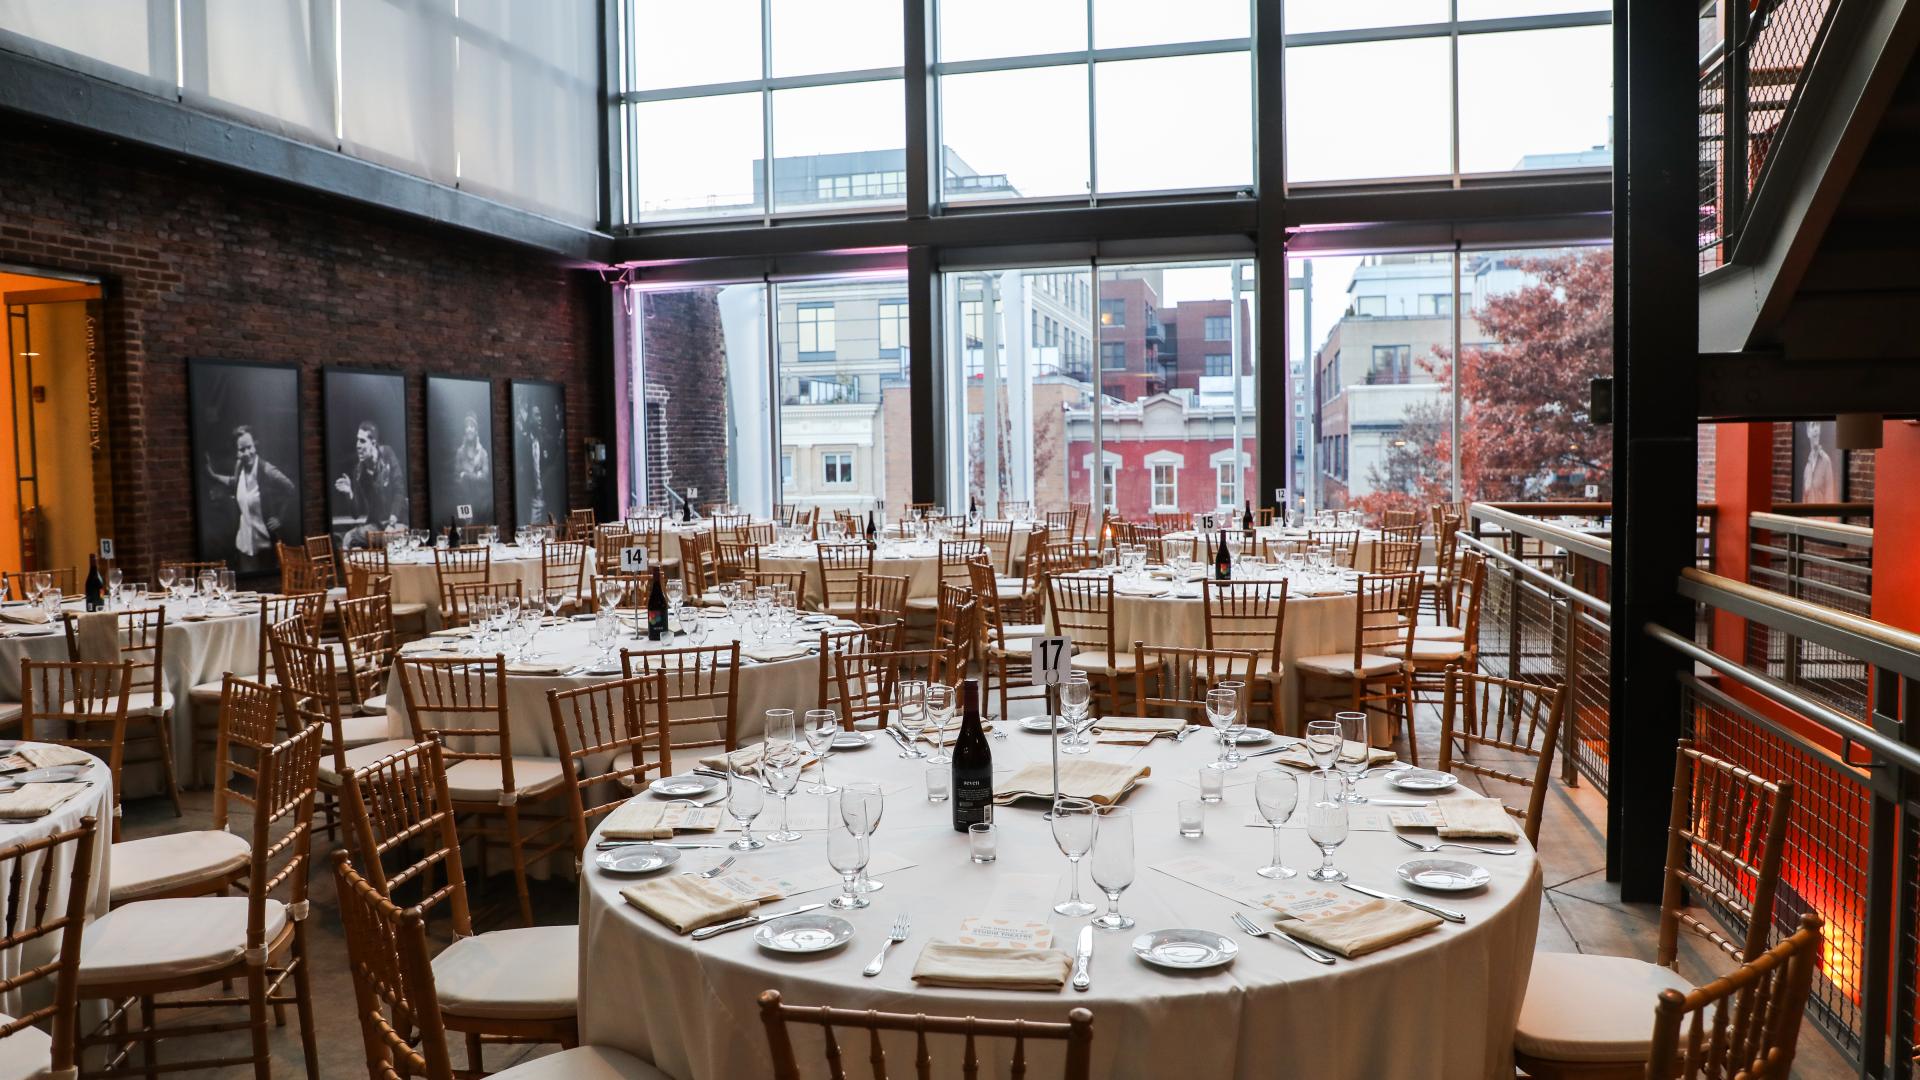 Award Ceremony Venues for Rent in Washington, DC